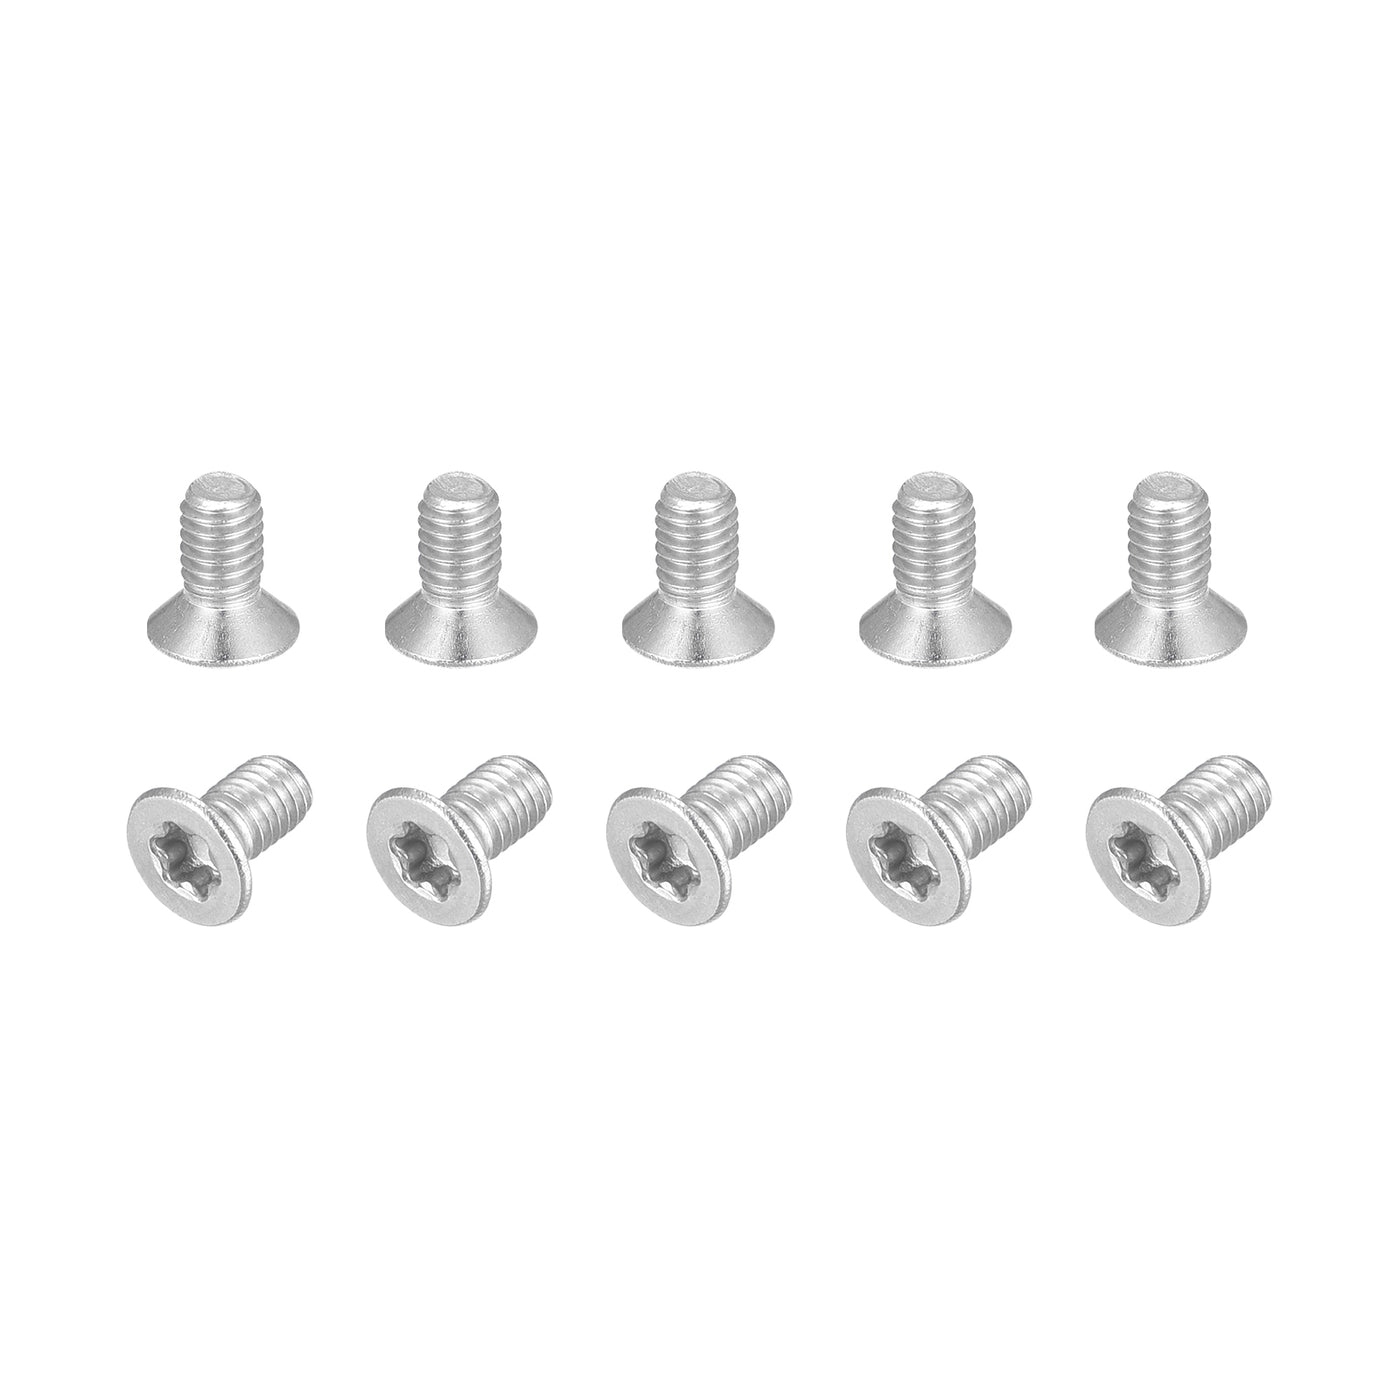 uxcell Uxcell M3x5mm Torx Security Screws, 10pcs 316 Stainless Steel Countersunk Head Screw